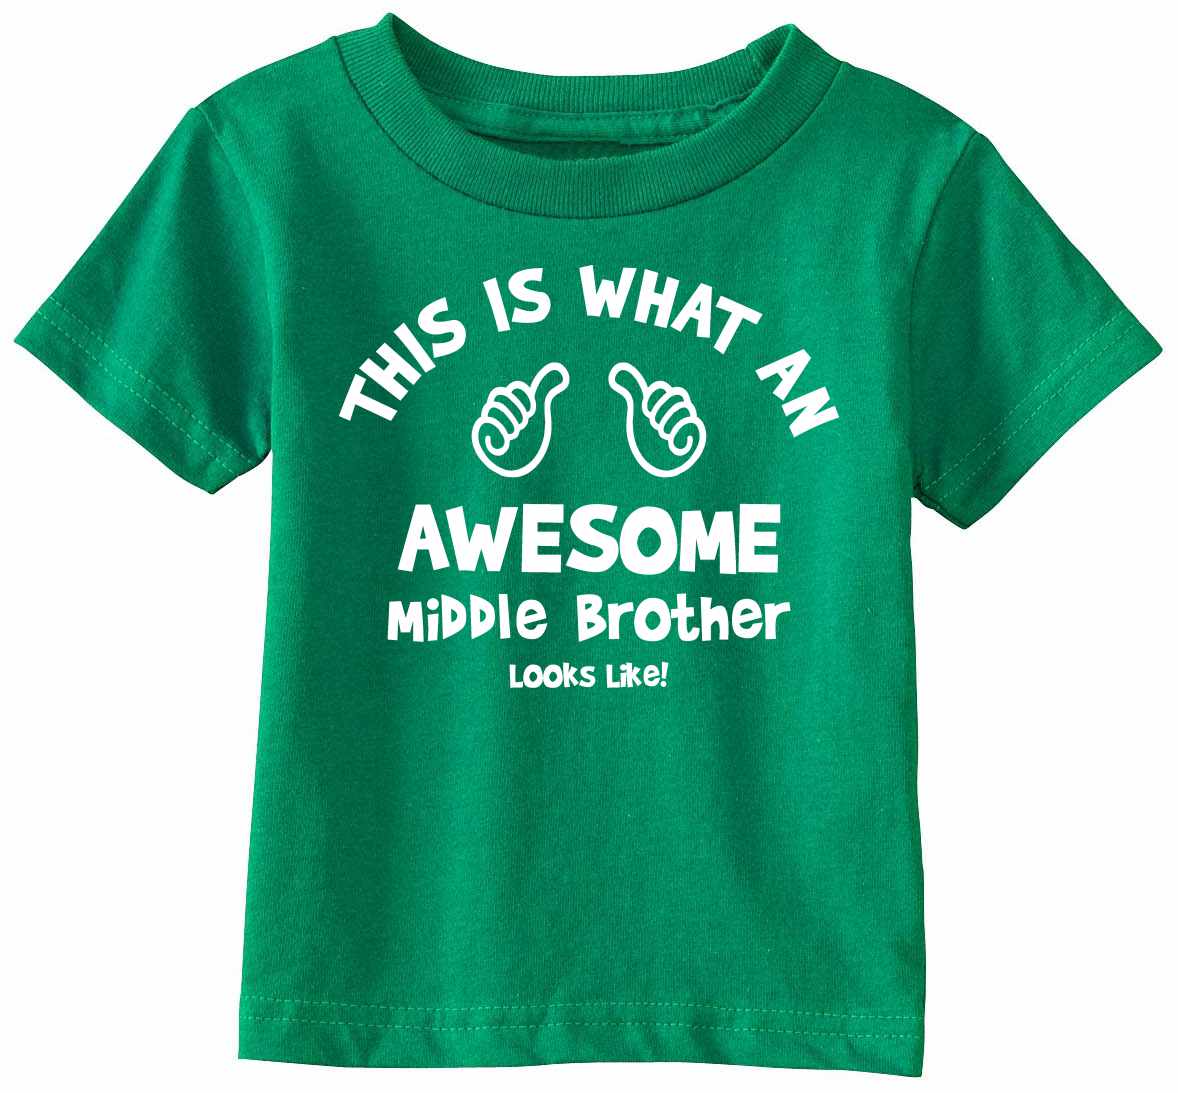 This Is What An Awesome Middle Brother Looks Like on Infant-Toddler T-Shirt